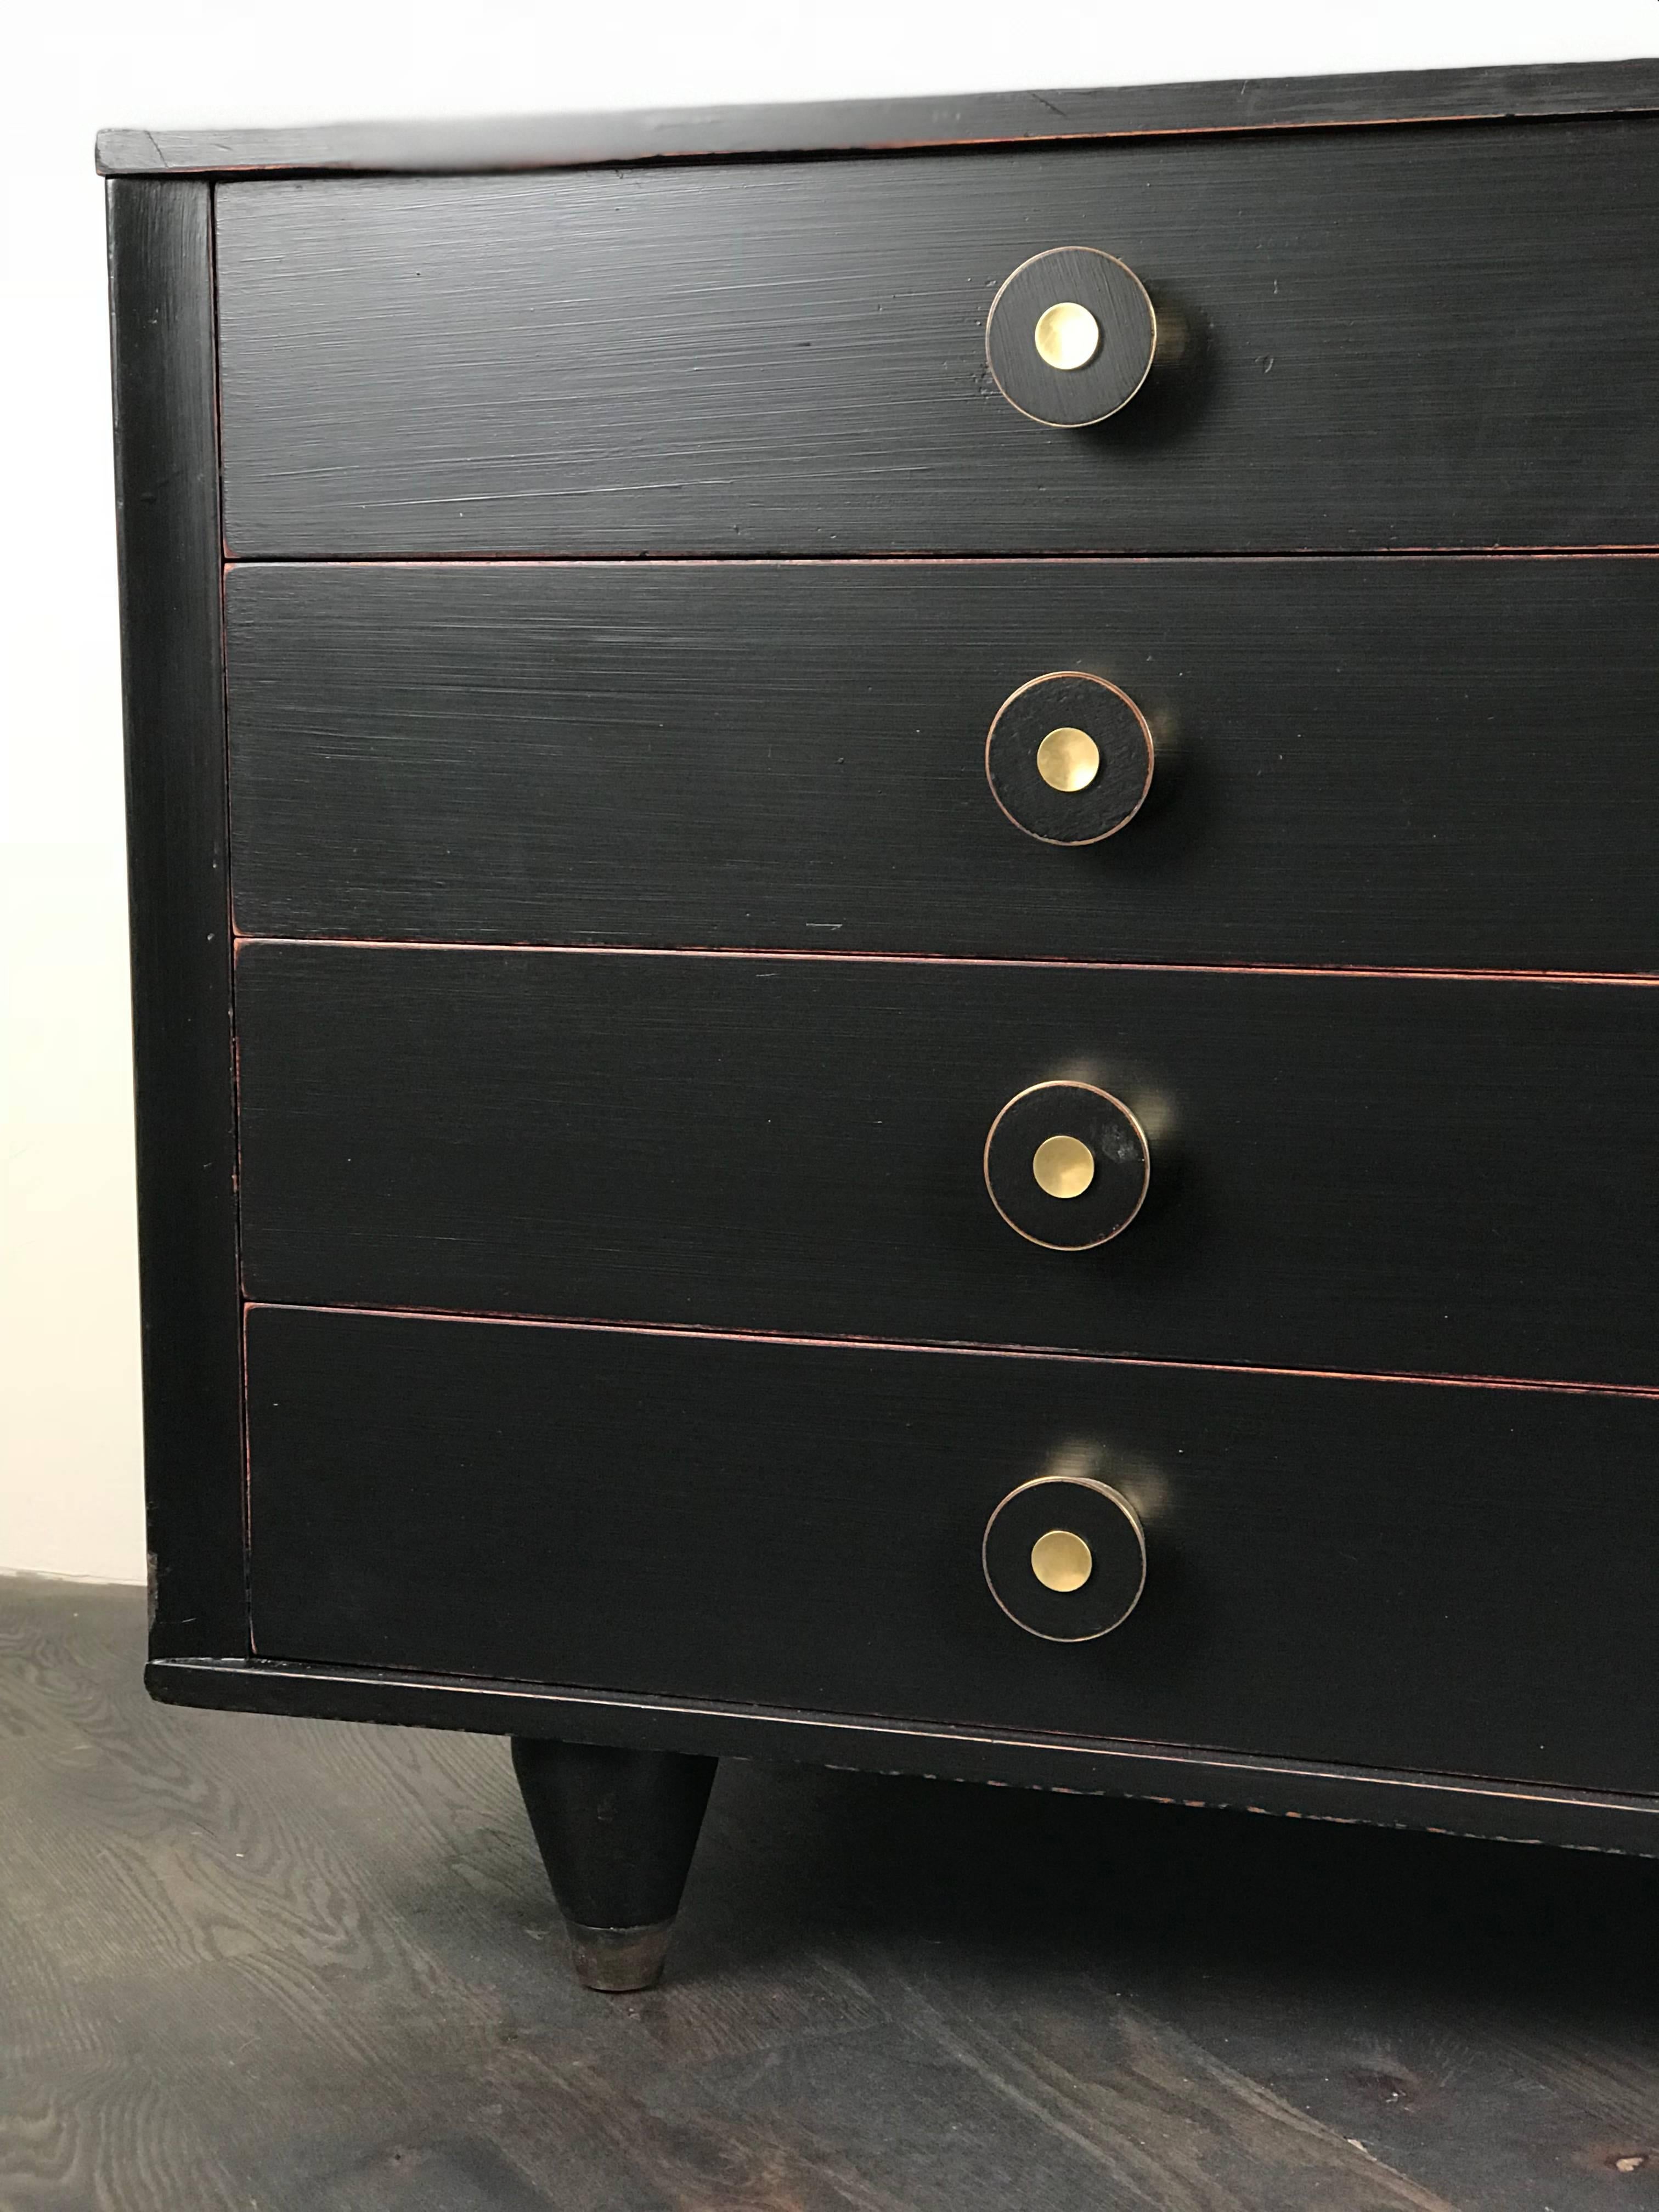 This Mid-Century Modern dresser features a dark painted finish, round brass pulls, cone-shaped legs and brass sabots, circa 1960.

